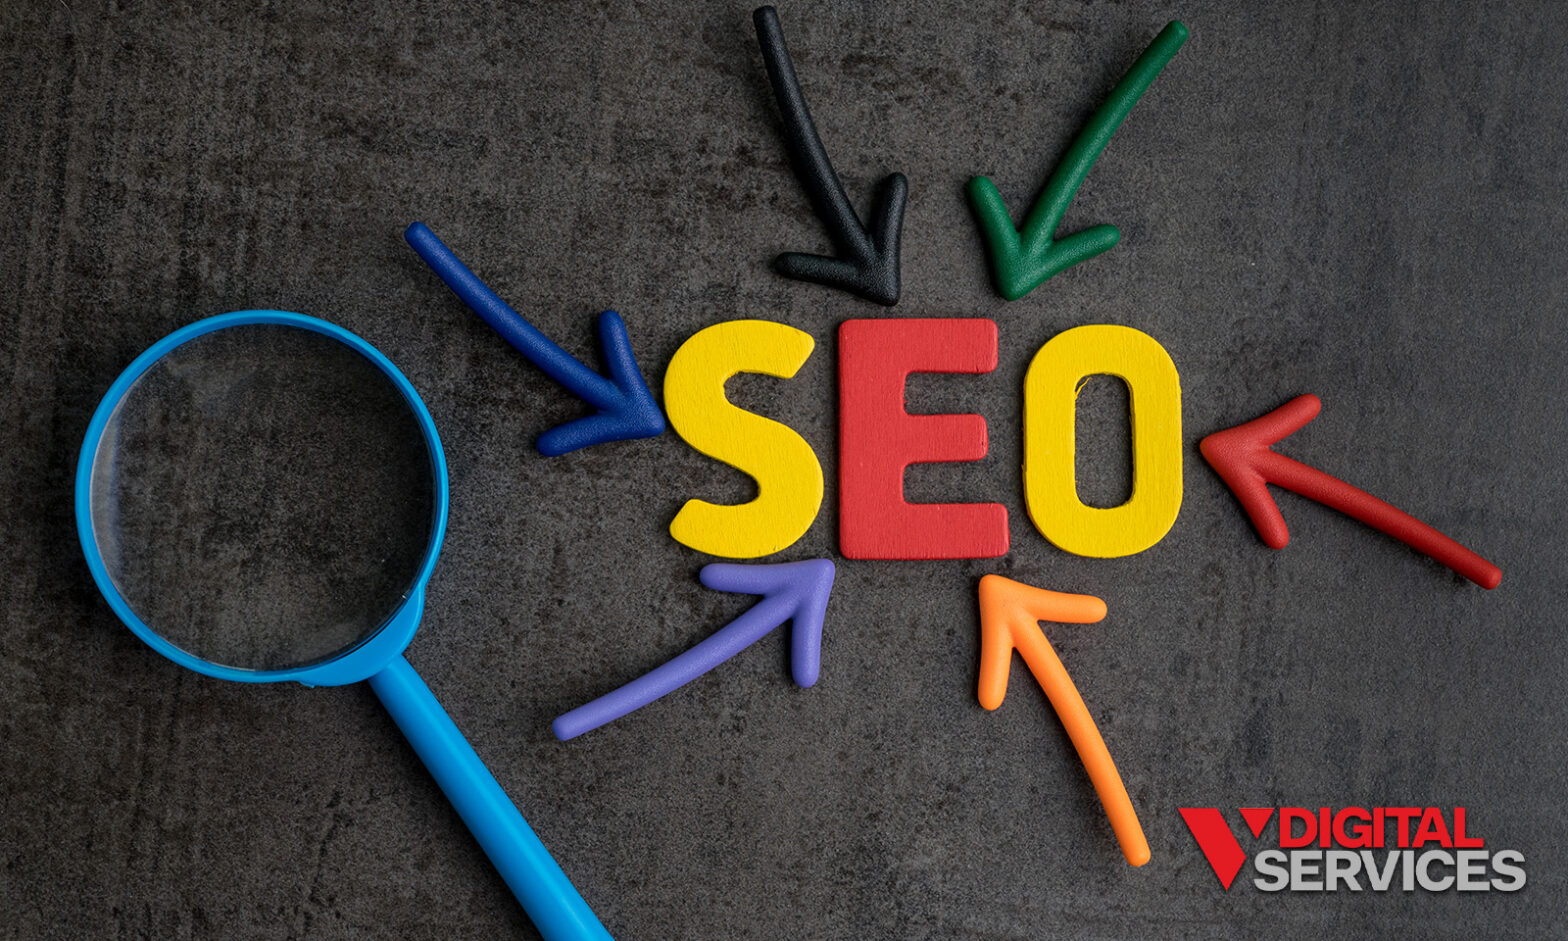 Featured image for post: SEO tips for small businesses